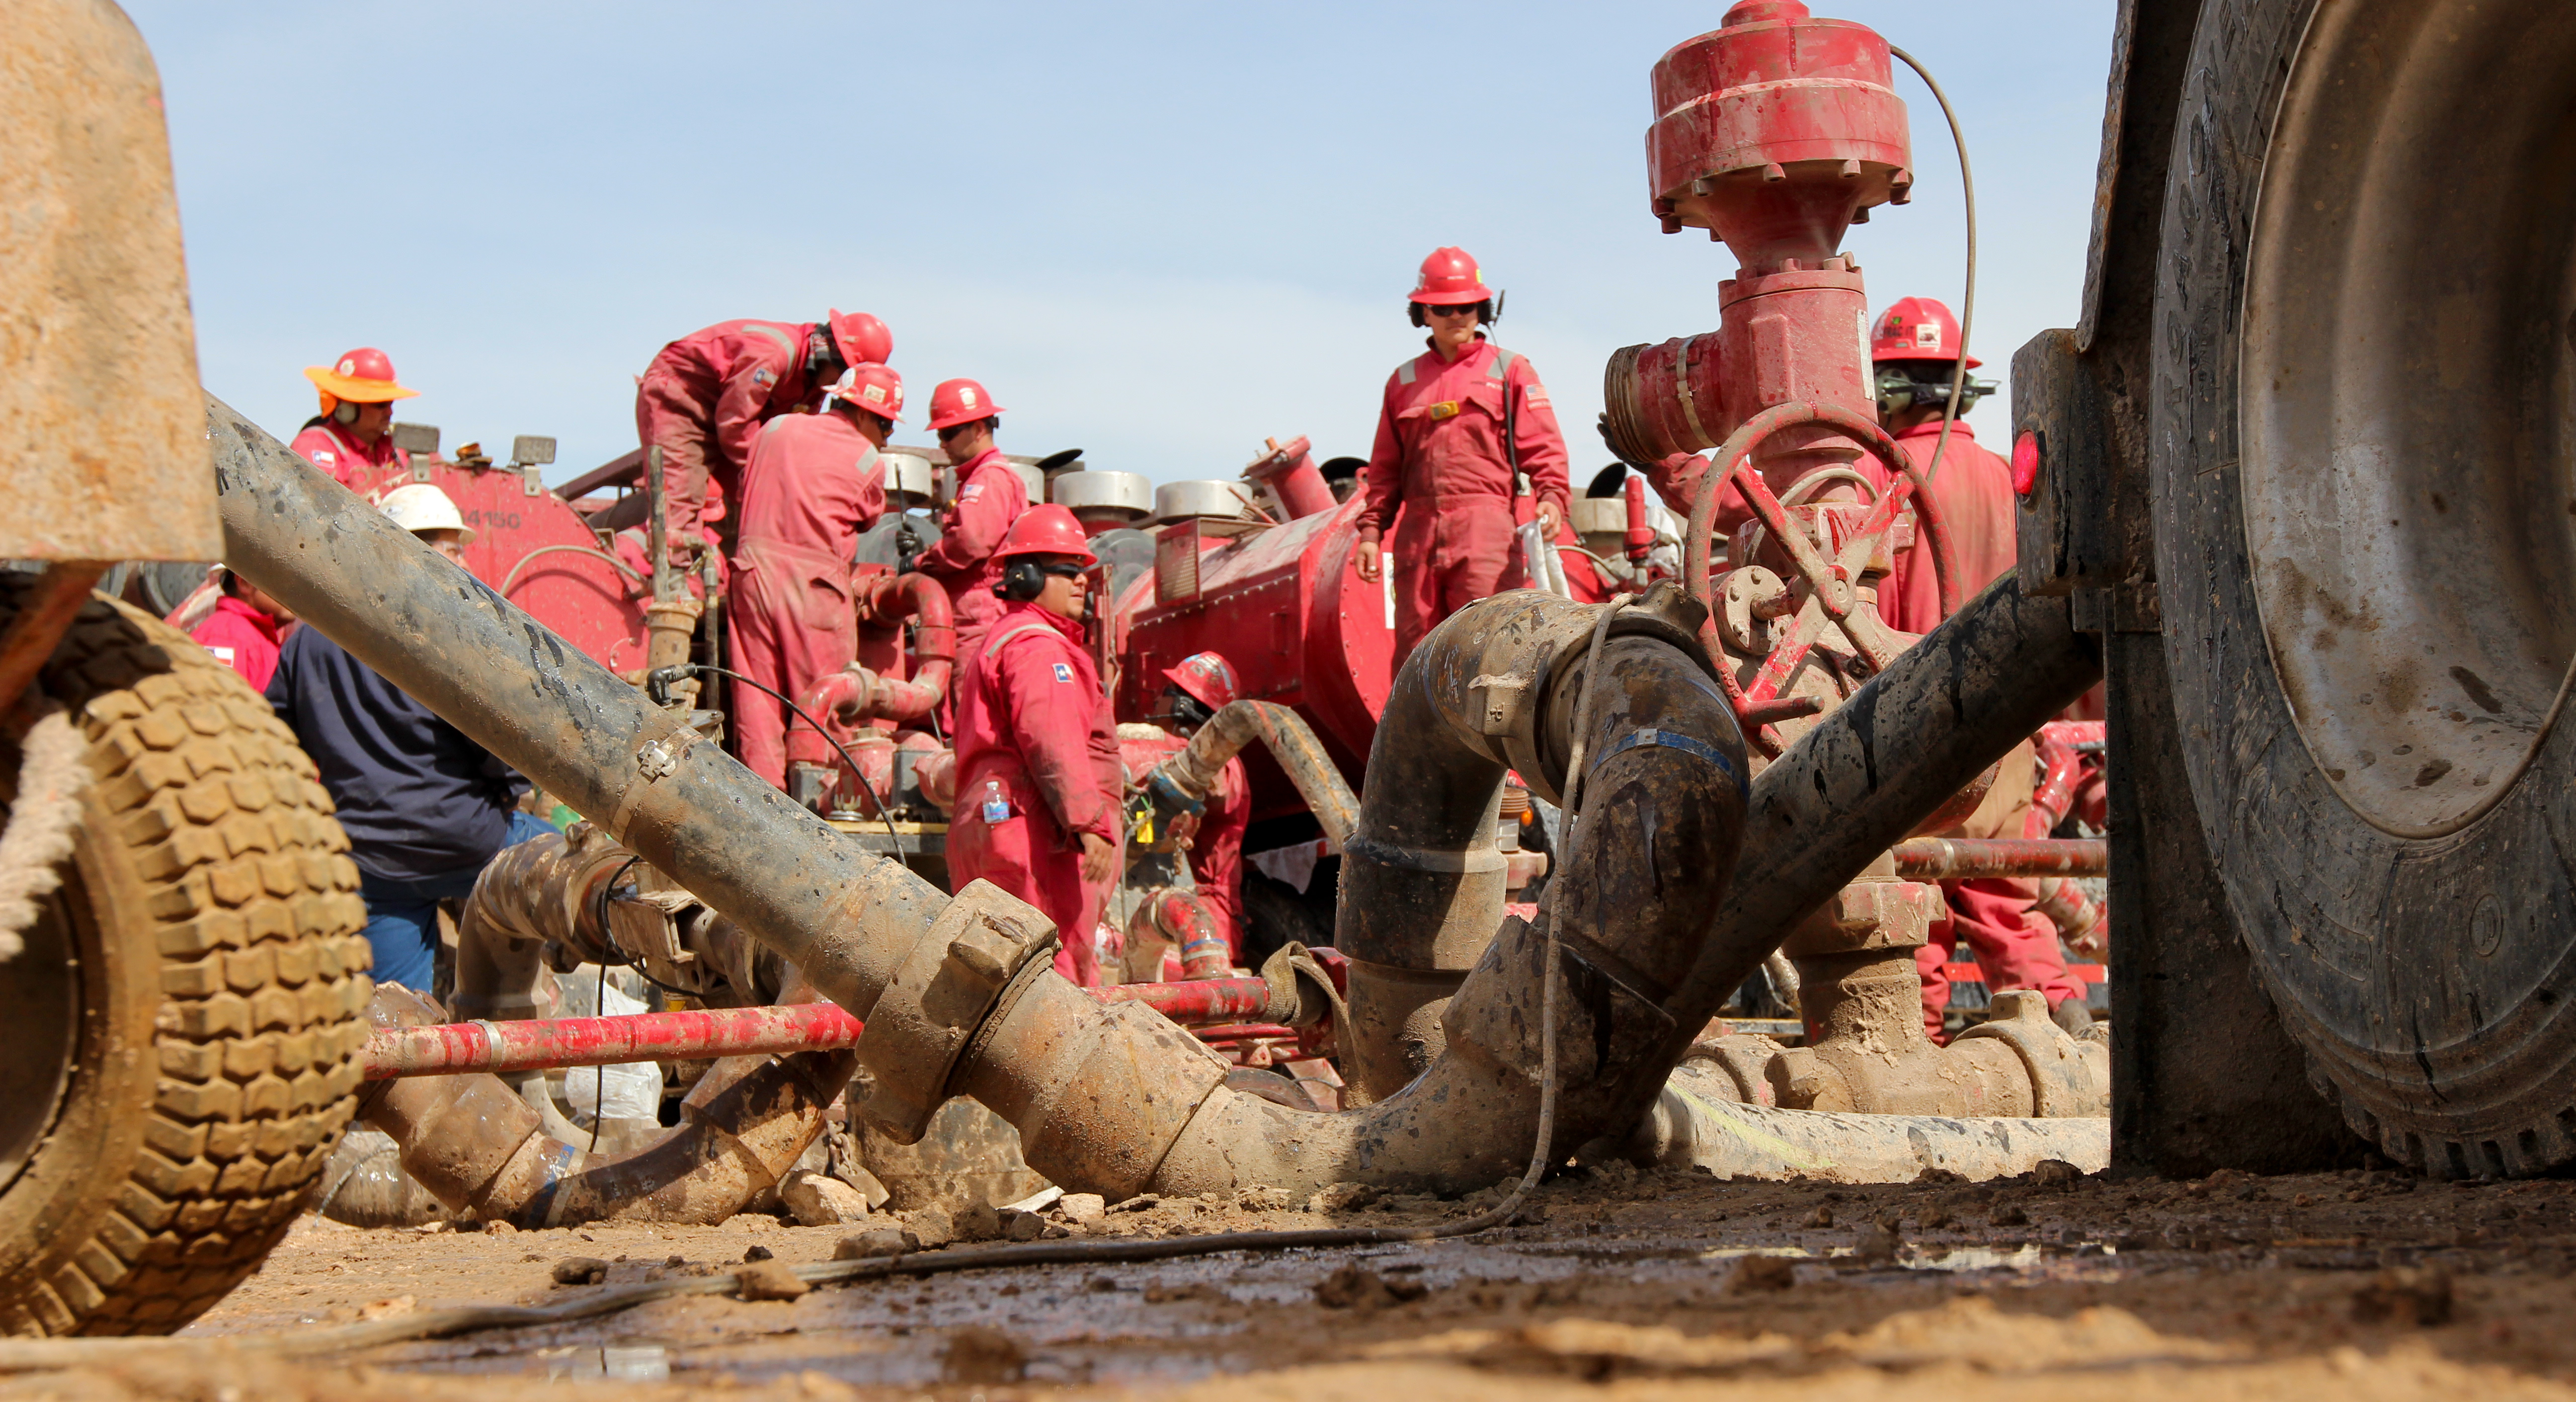 A frack operation in the Permian Basin of Texas, the nation’s highest-producing oilfield. The Permian Basin was once the floor of an ancient seabed that today is laden with hydrocarbons. (photo: Lorne Matalon)